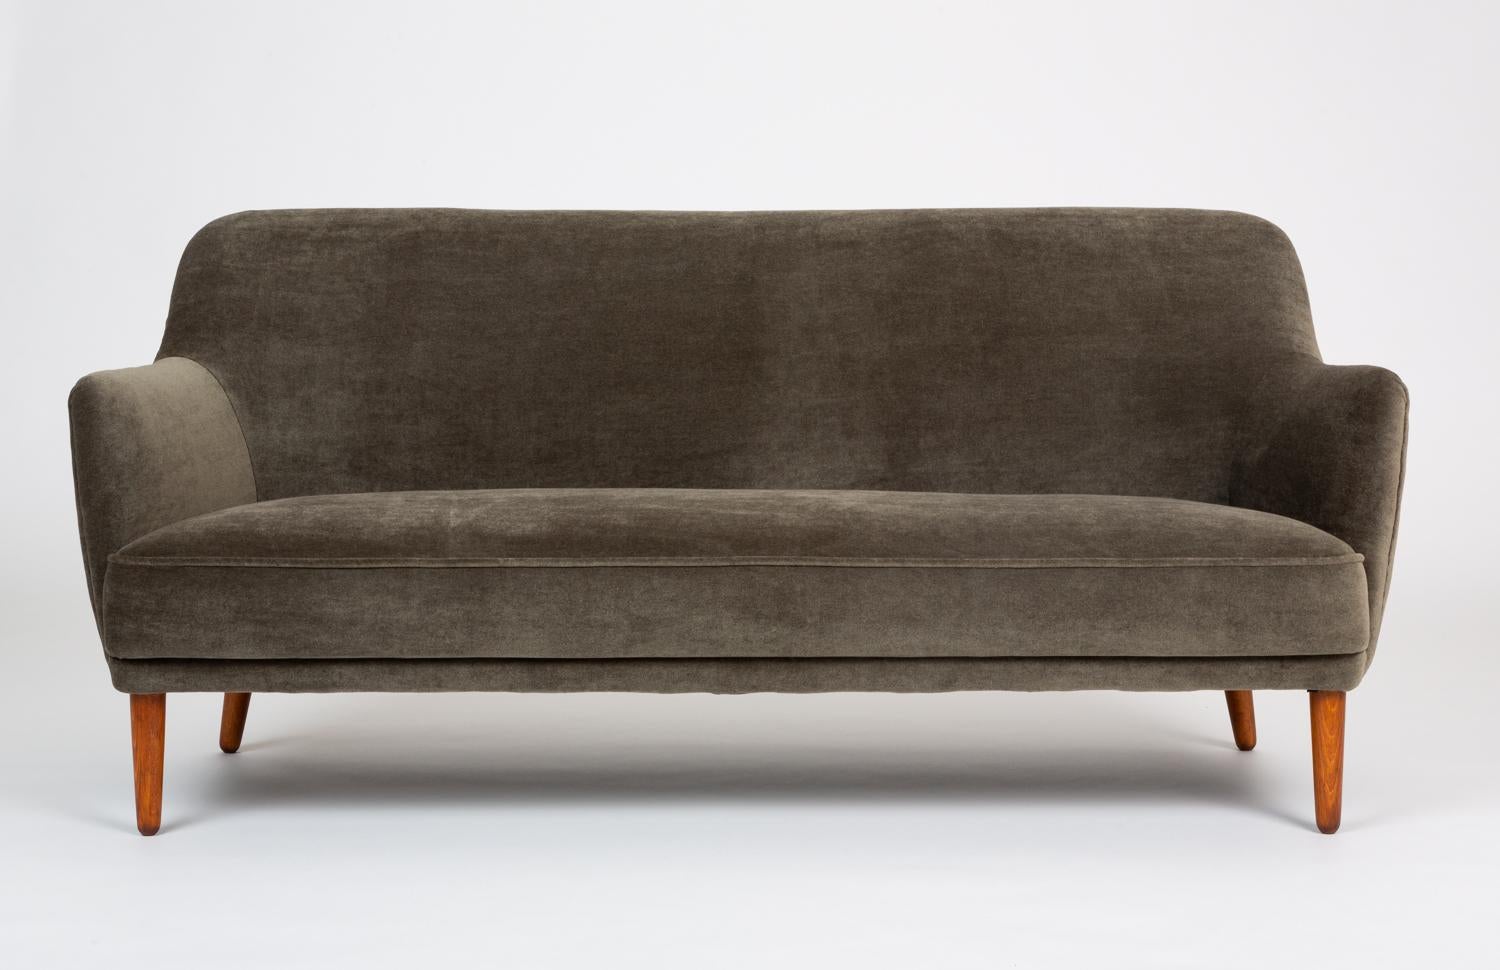 A Danish compact sofa with unbroken curves designed by John Vedel-Rieper and produced by Anker Petersen in the 1950s. The oyster-gray velvet upholstery is hand-stitched tight to the frame, emphasizing the design’s simple elegance. The seat is a